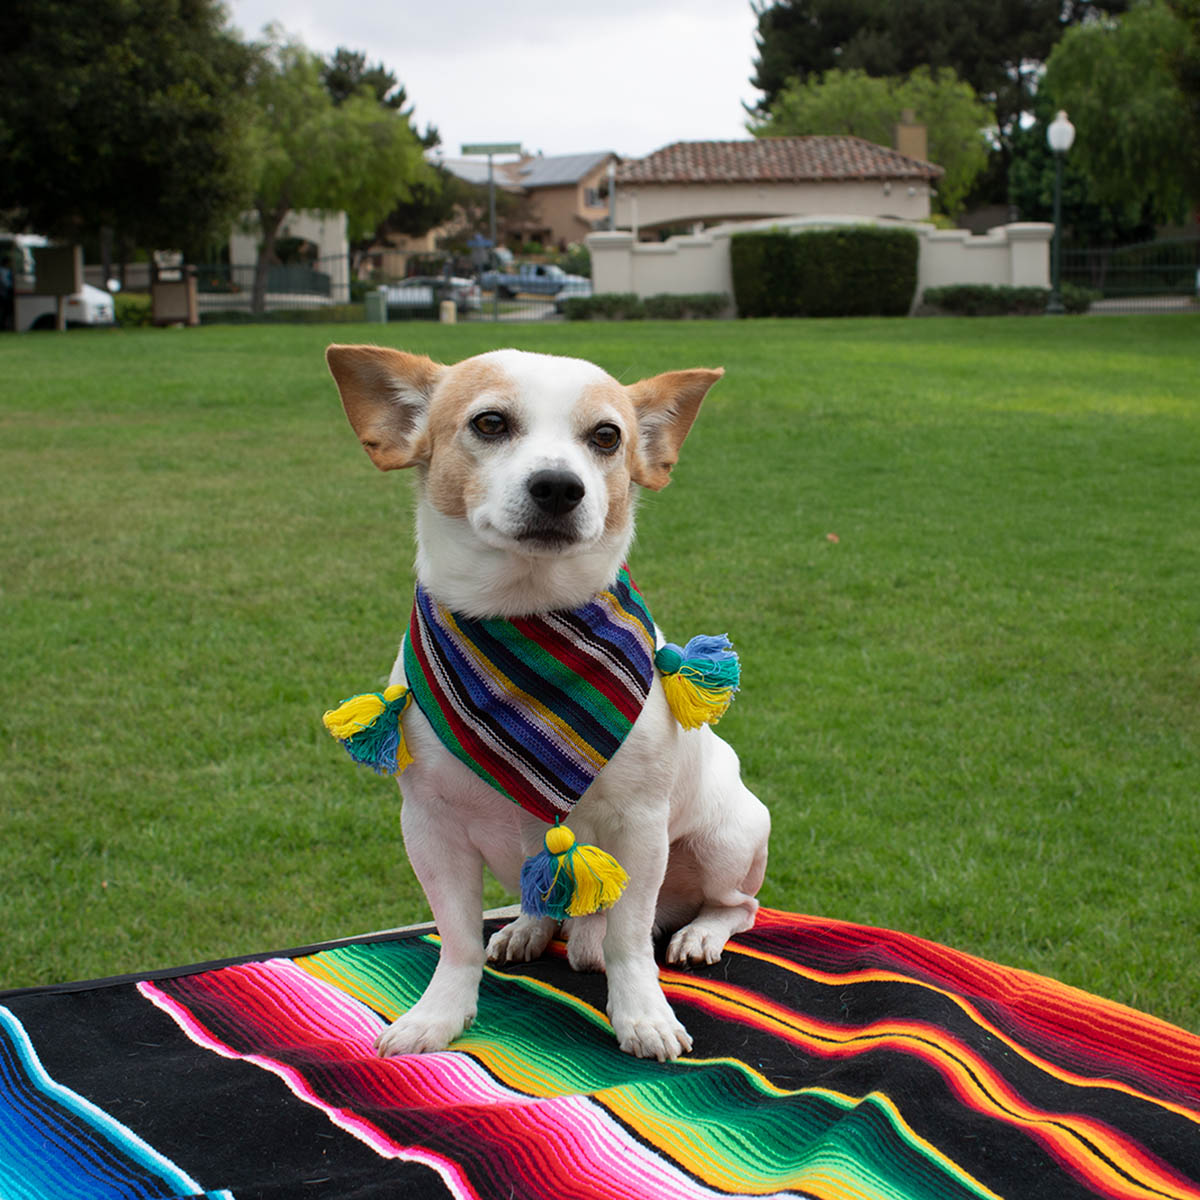 A cute Chihuahua proudly wears an artisanal bandana, while sitting on a Mexican handmade blanket